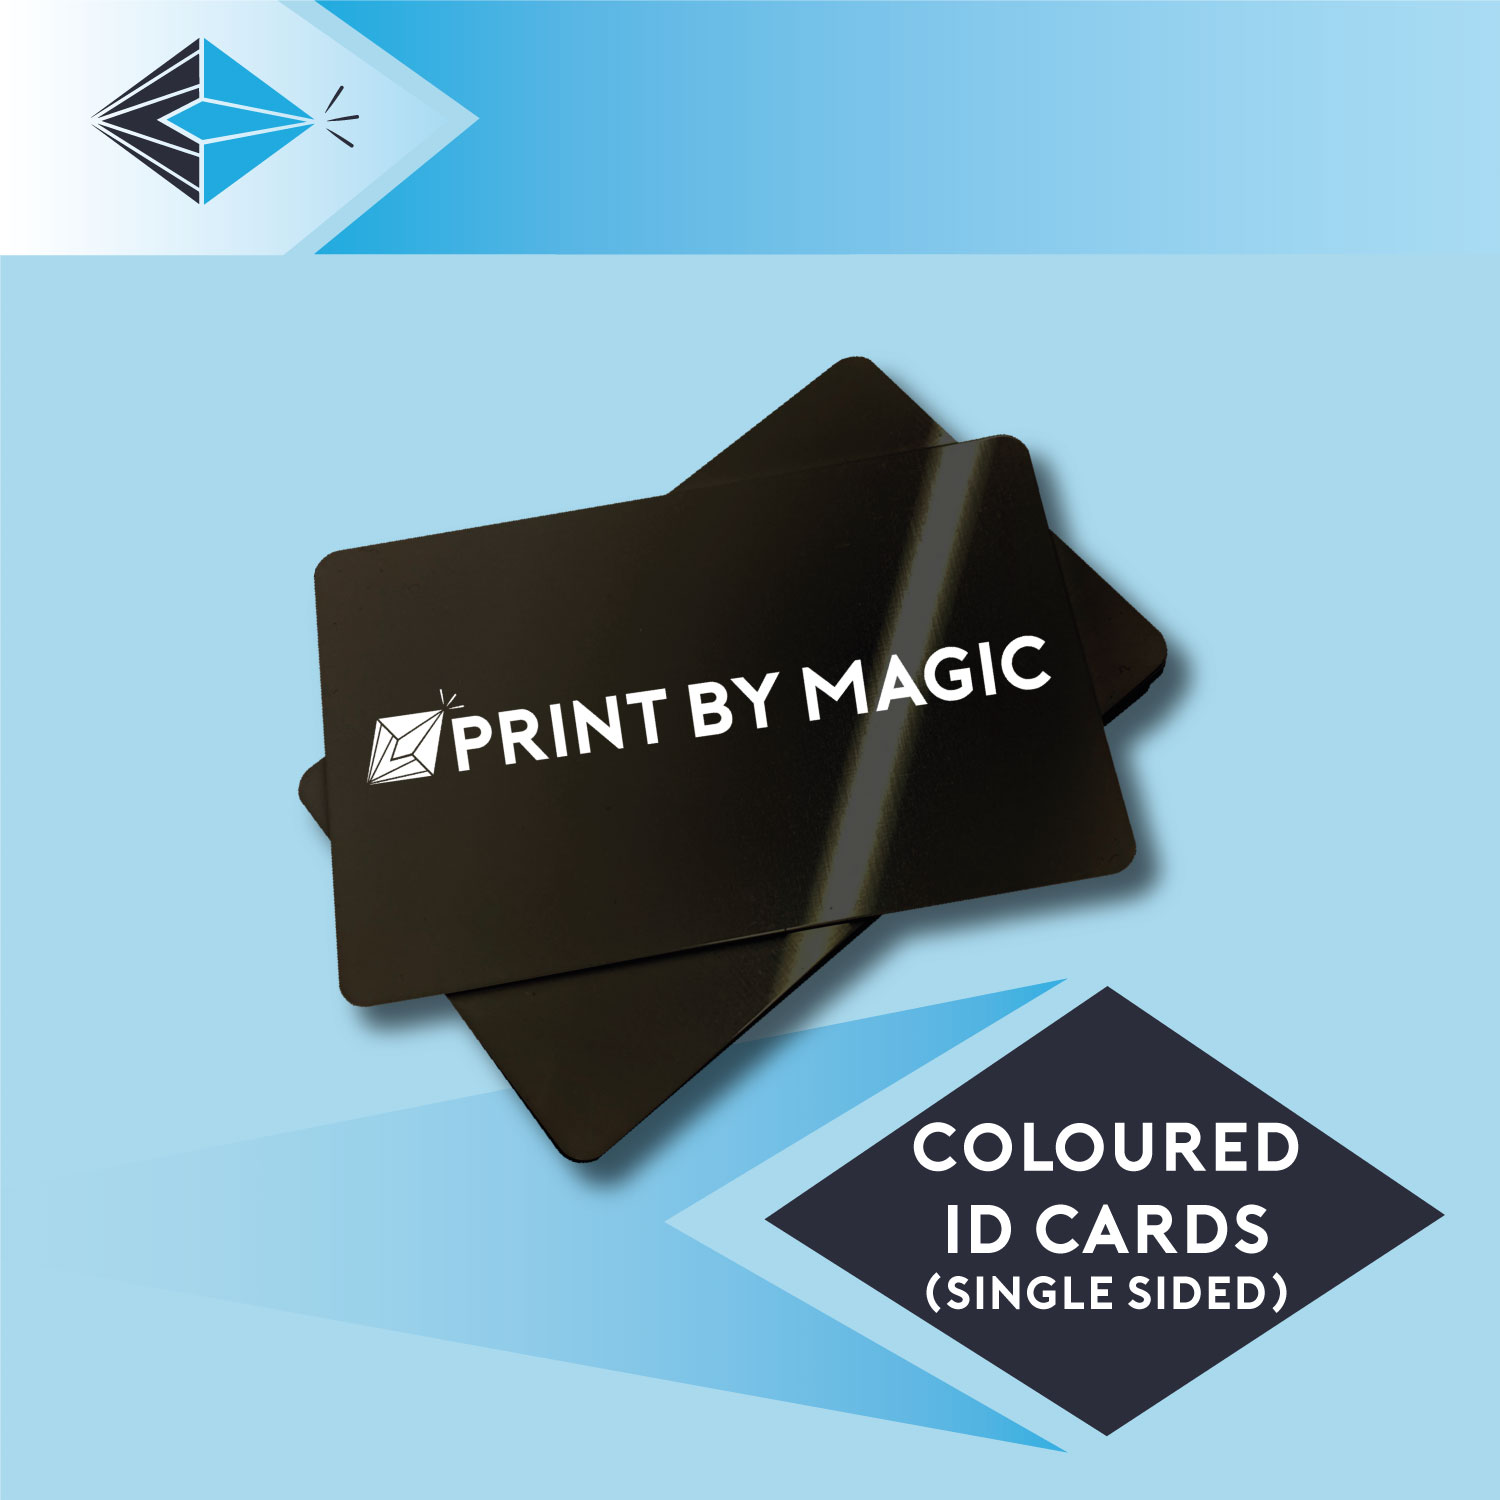 Coloured ID card printing identification cards on black plastic stockport manchester uk